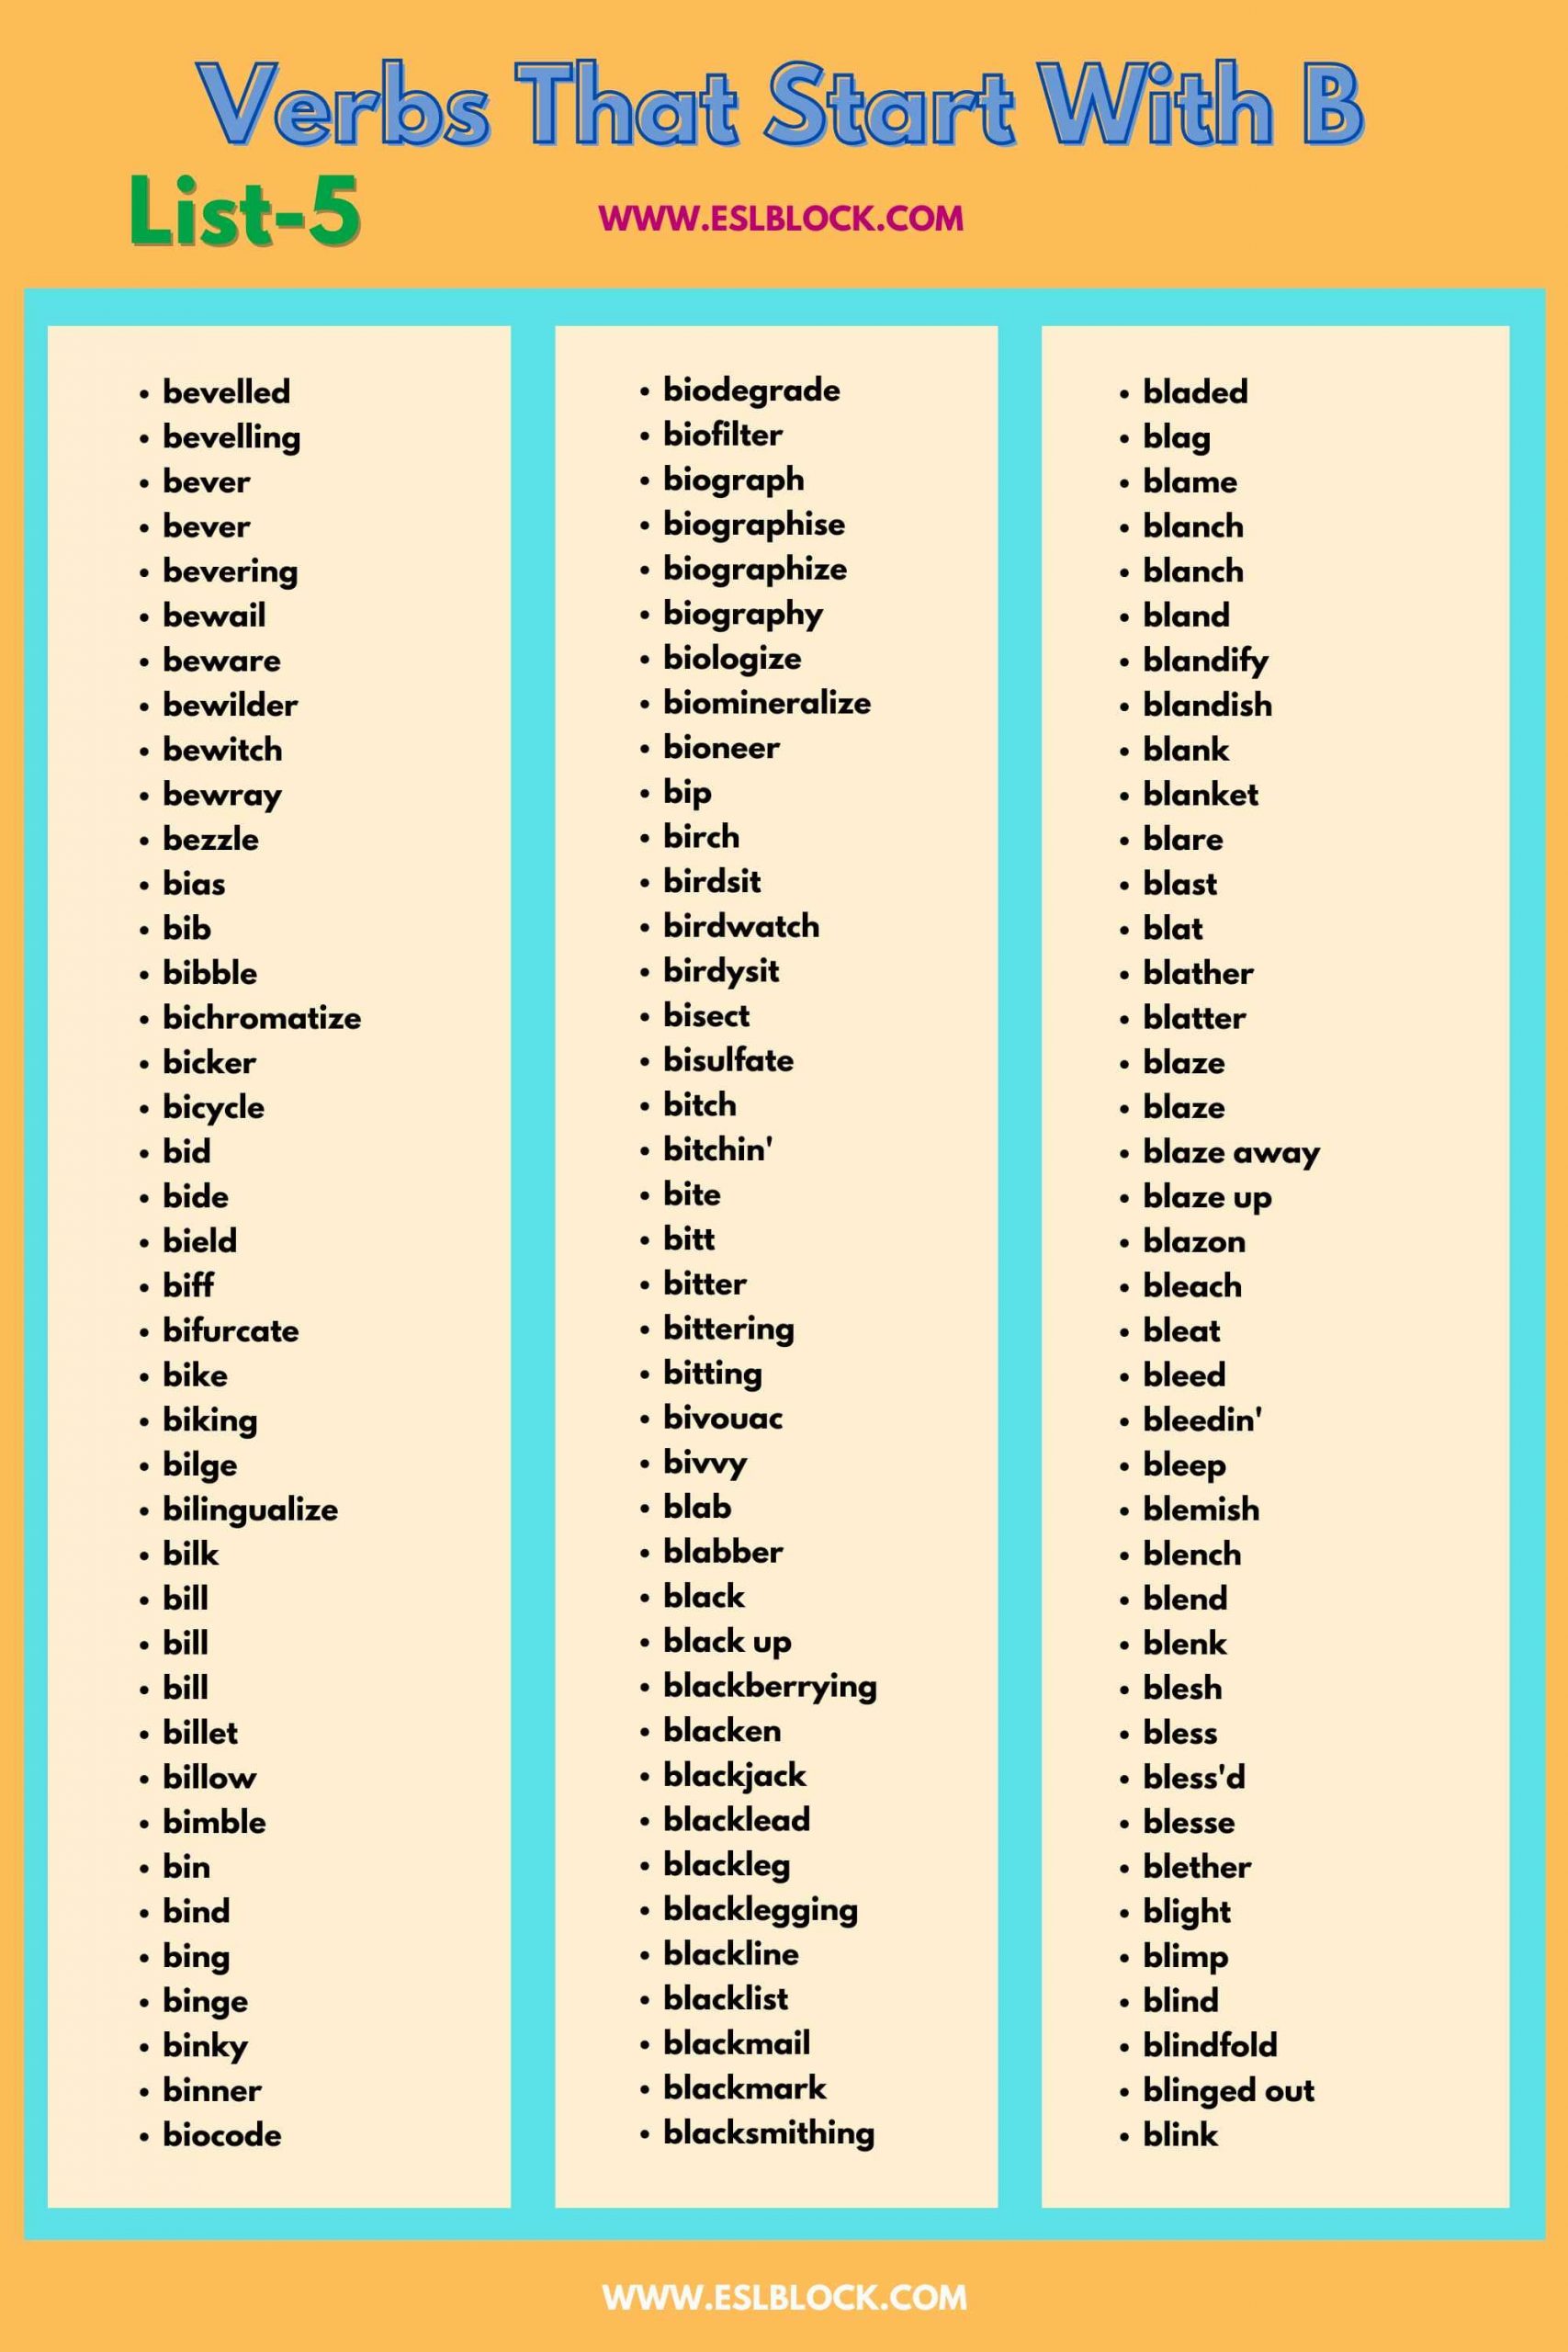 4 Letter Verbs, 5 Letter Verbs Starting With B, Action Words, Action Words That Start With B, B Action Words, B Verbs, B Verbs in English, English, English Grammar, English Vocabulary, English Words, List of Verbs That Start With B, Verbs List, Verbs That Start With B, Vocabulary, Words That Start With B